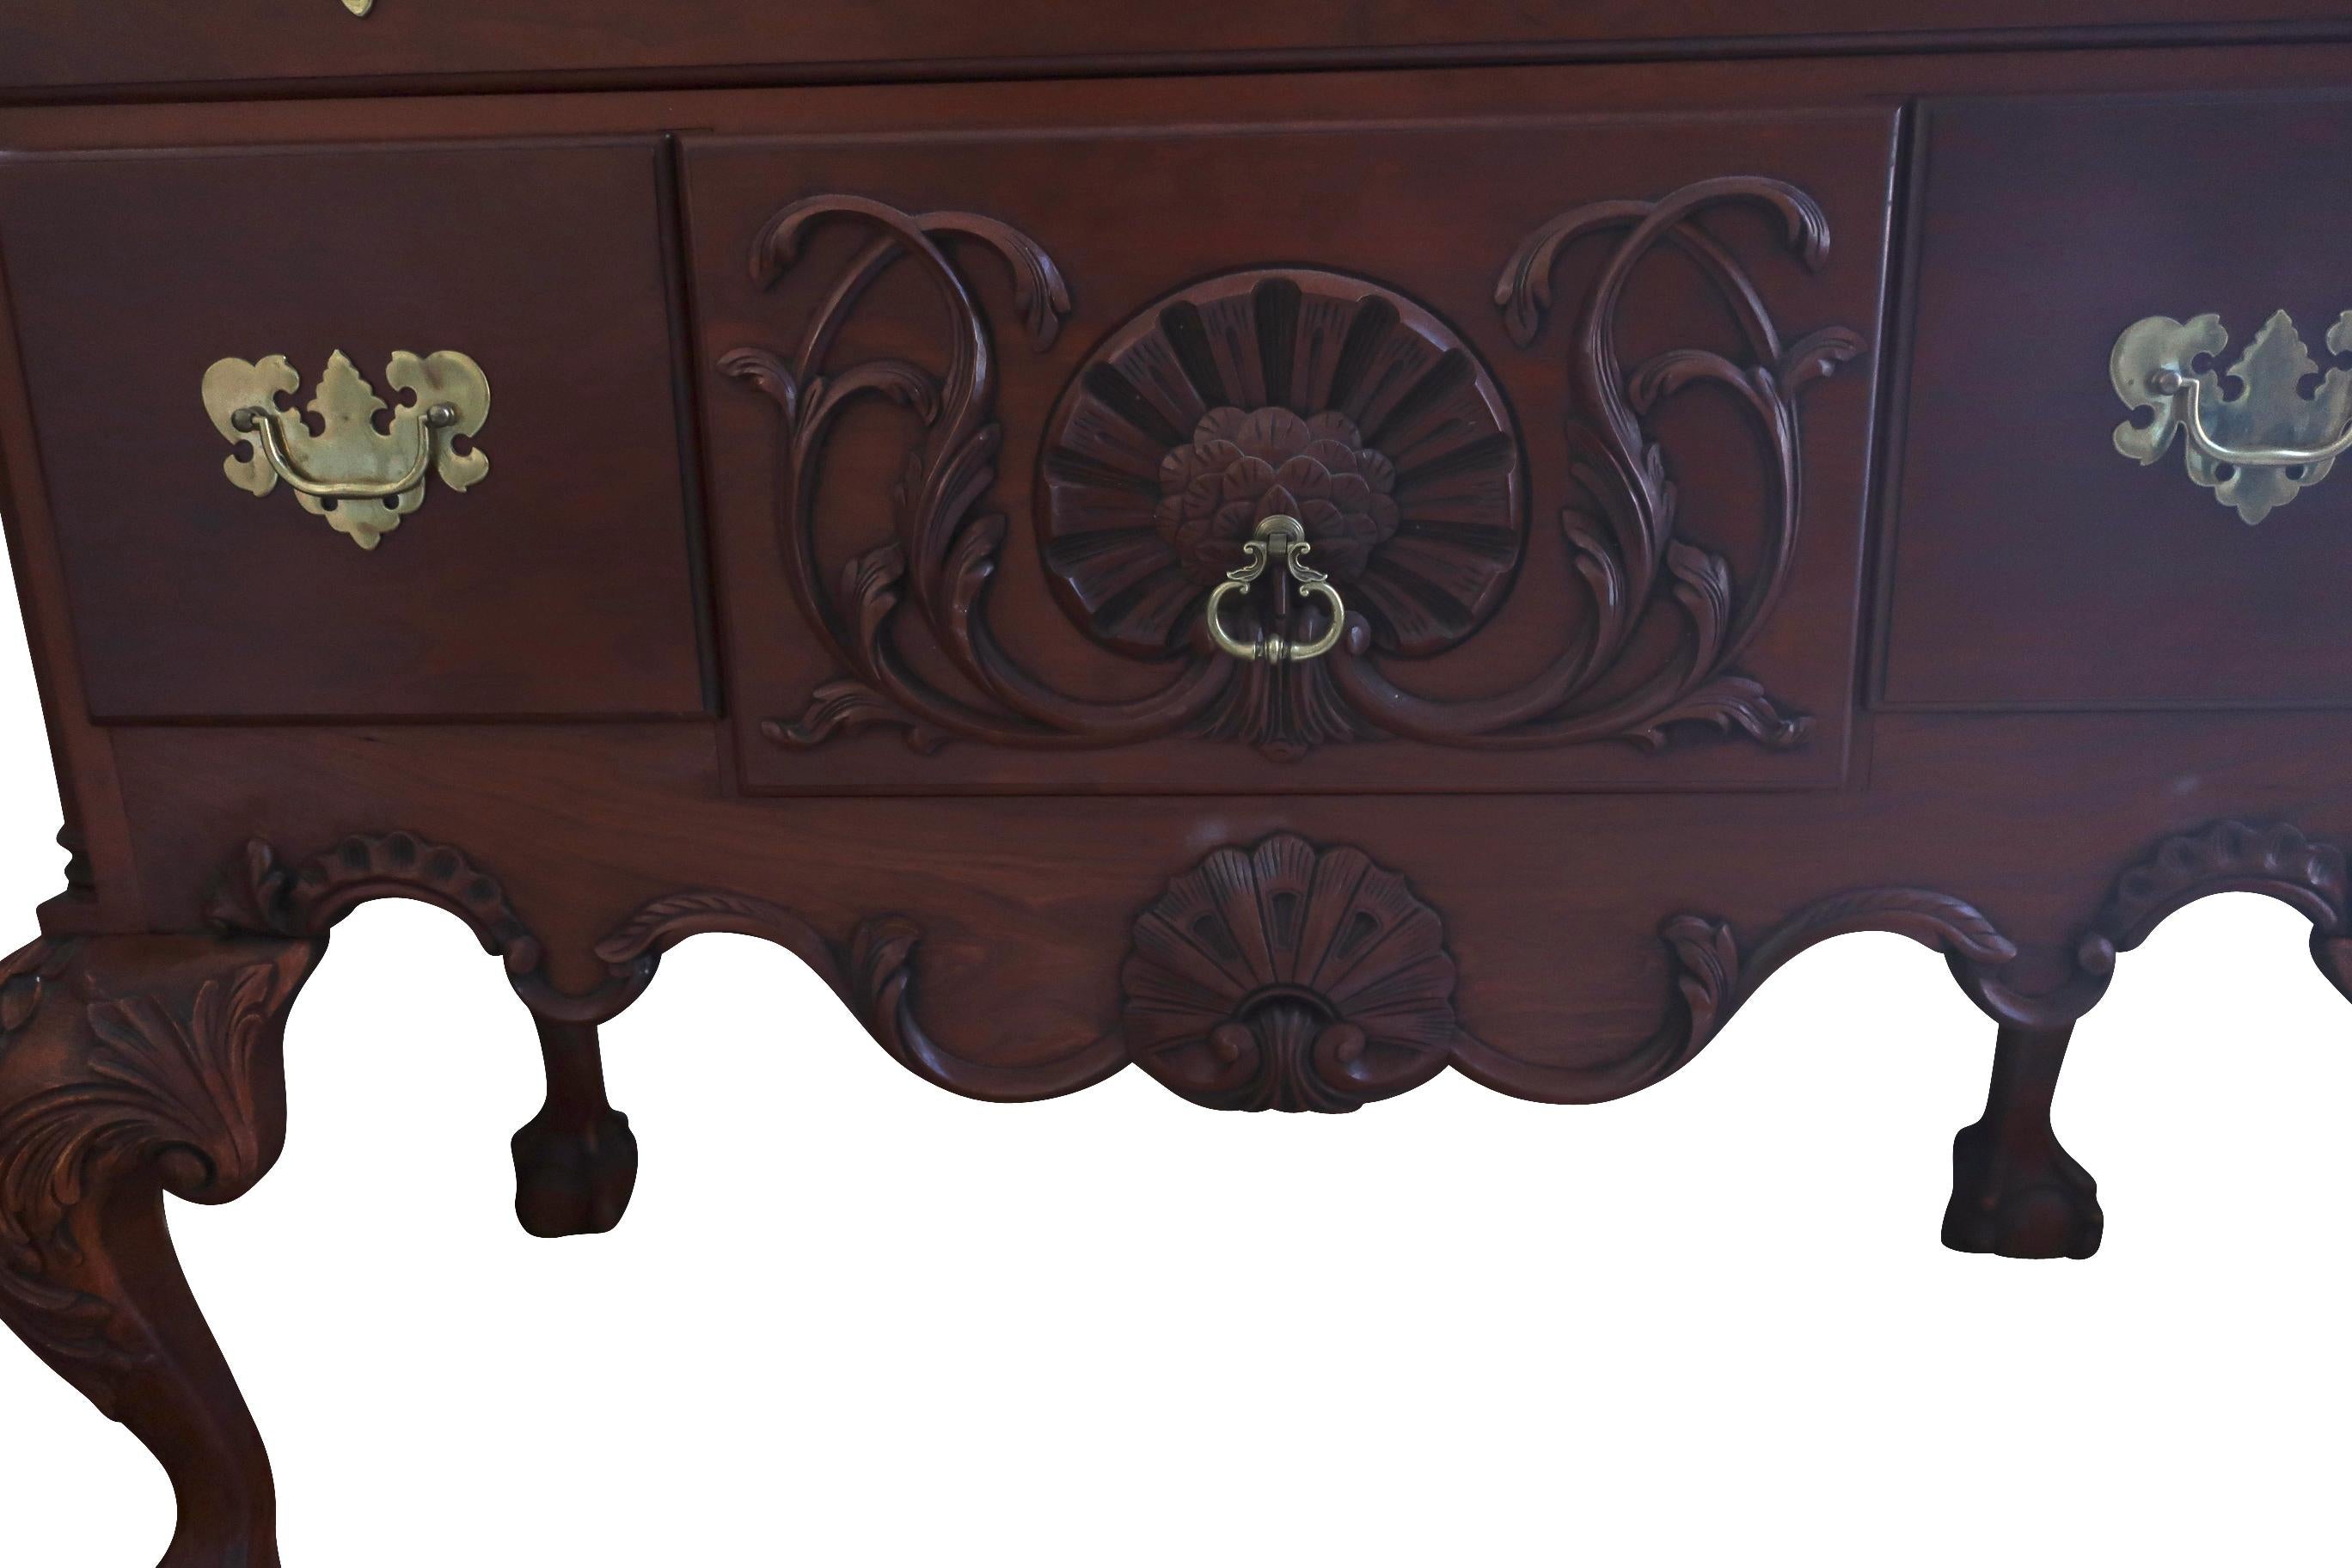 An Eldred Wheeler Philadelphia highboy with scroll top bonnet with flame and urn finials and carved rosettes. Nicely carved shell and streamers on the top bonnet. Scalloped aprons on cabriole legs with shells terminating in ball and claw feet. The